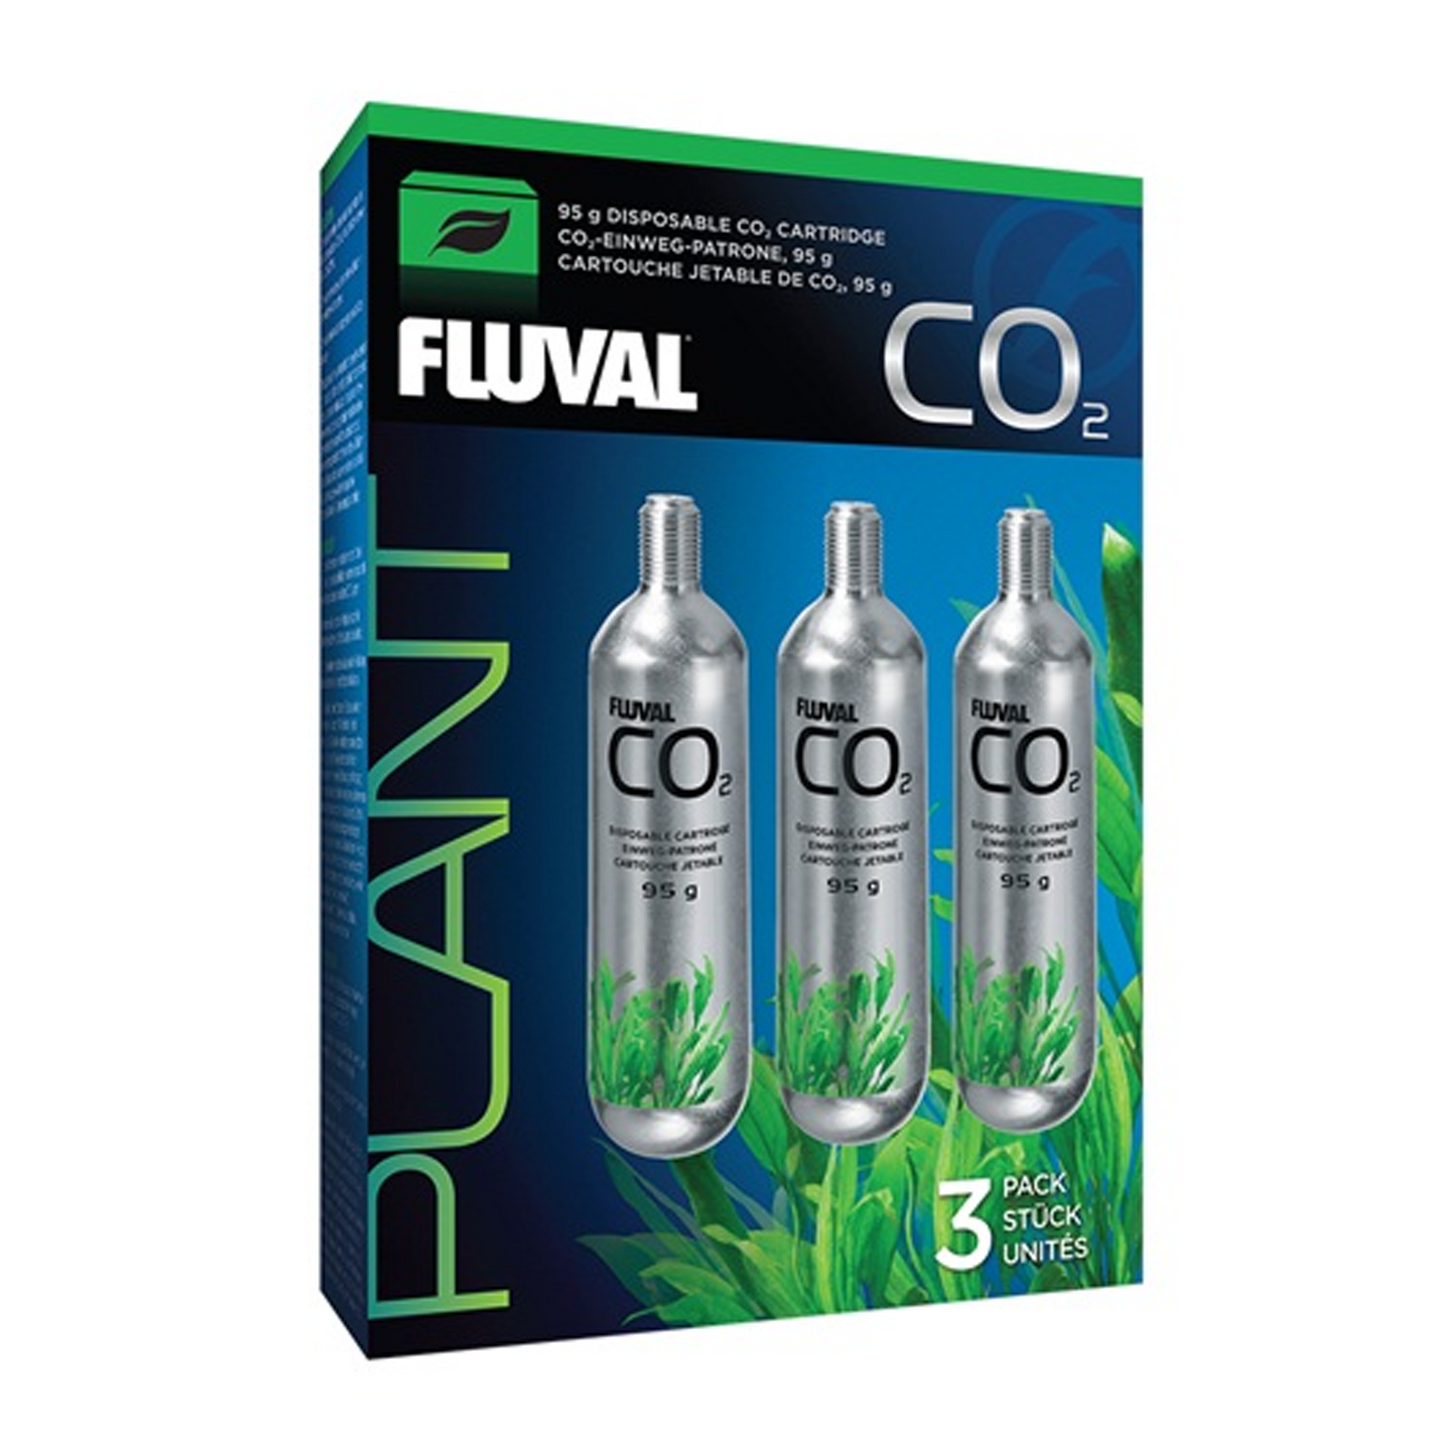 Fluval 95g CO₂ Disposable Cartridge (Pack of 3)